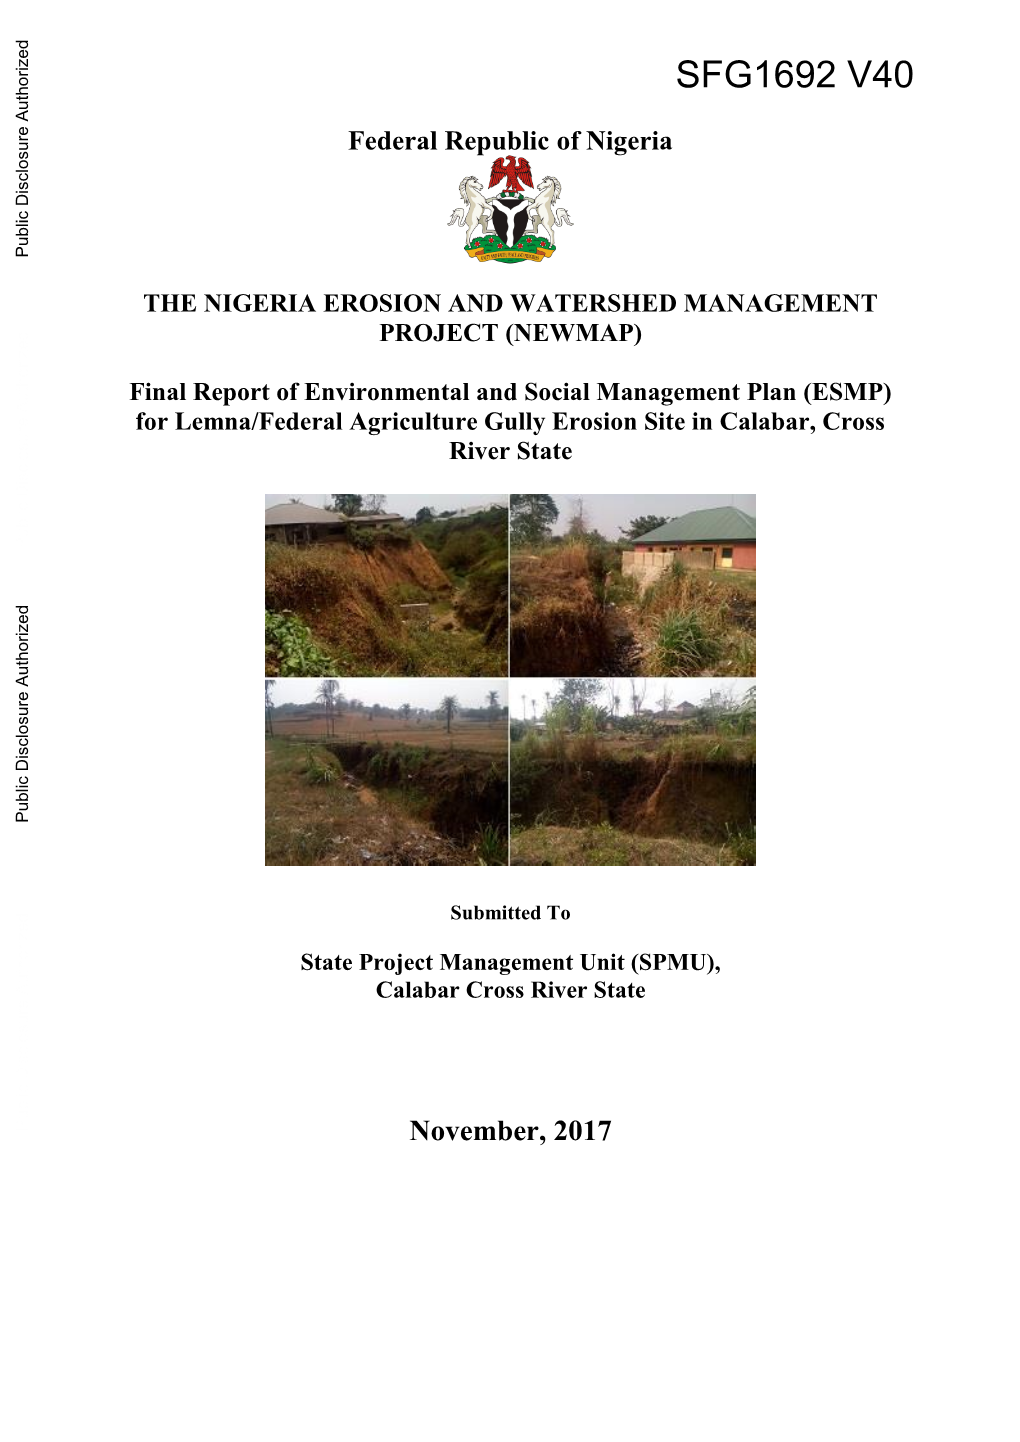 For Lemna/Federal Agriculture Gully Erosion Site in Calabar, Cross River State